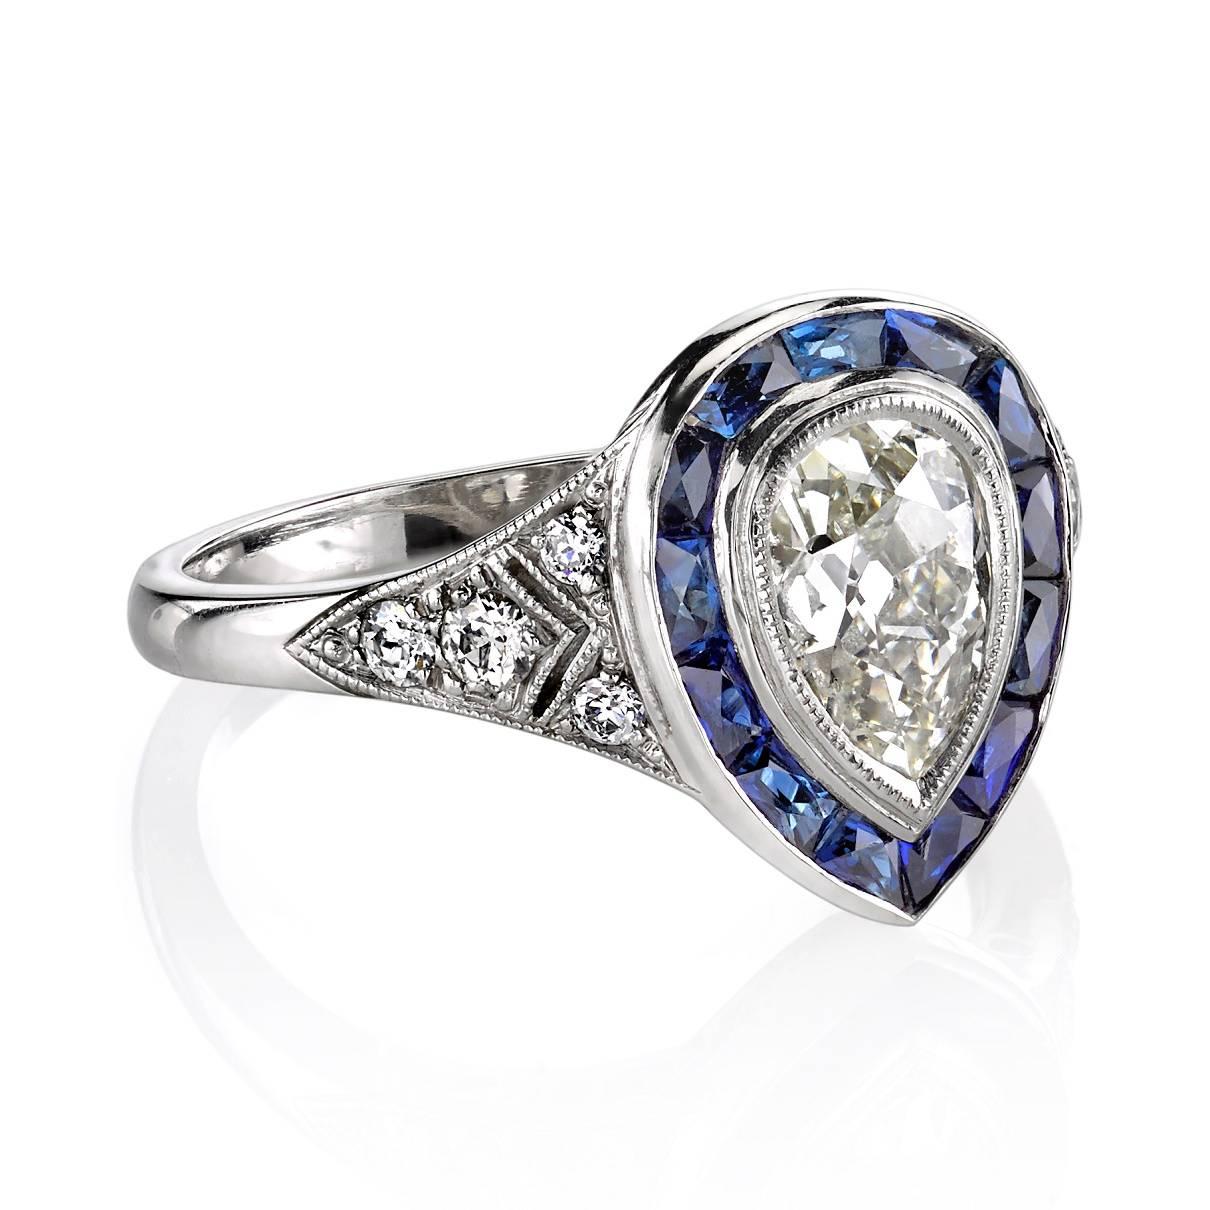 1.12ct I/VS1 EGL certified Pear shape diamond set in a handcrafted platinum mounting. A beautiful low profile design featuring intricate side details and a French cut sapphire halo.